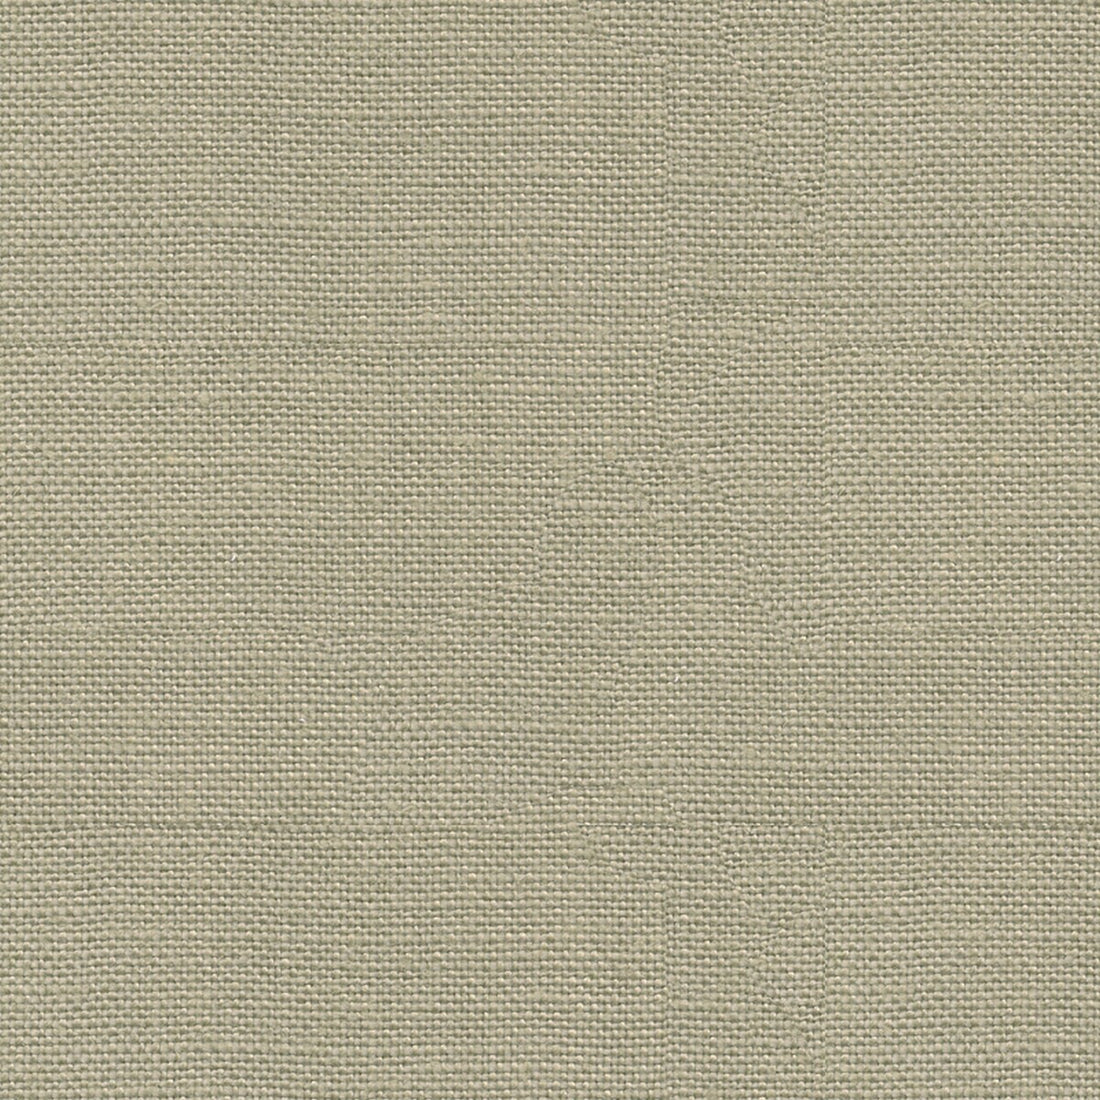 Newport fabric in dove grey color - pattern ED85116.910.0 - by Threads in the Variation collection